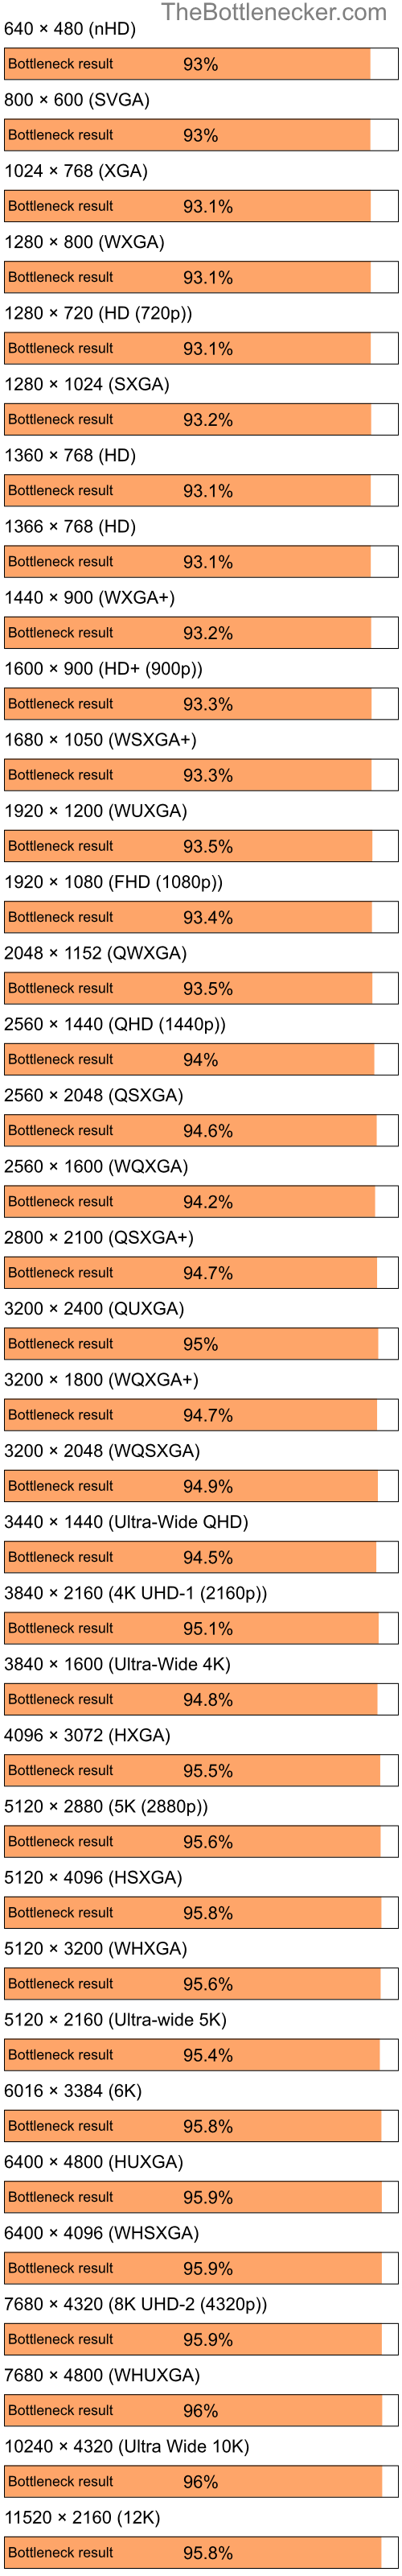 Bottleneck results by resolution for Intel Celeron M and AMD Radeon 9250 in Graphic Card Intense Tasks